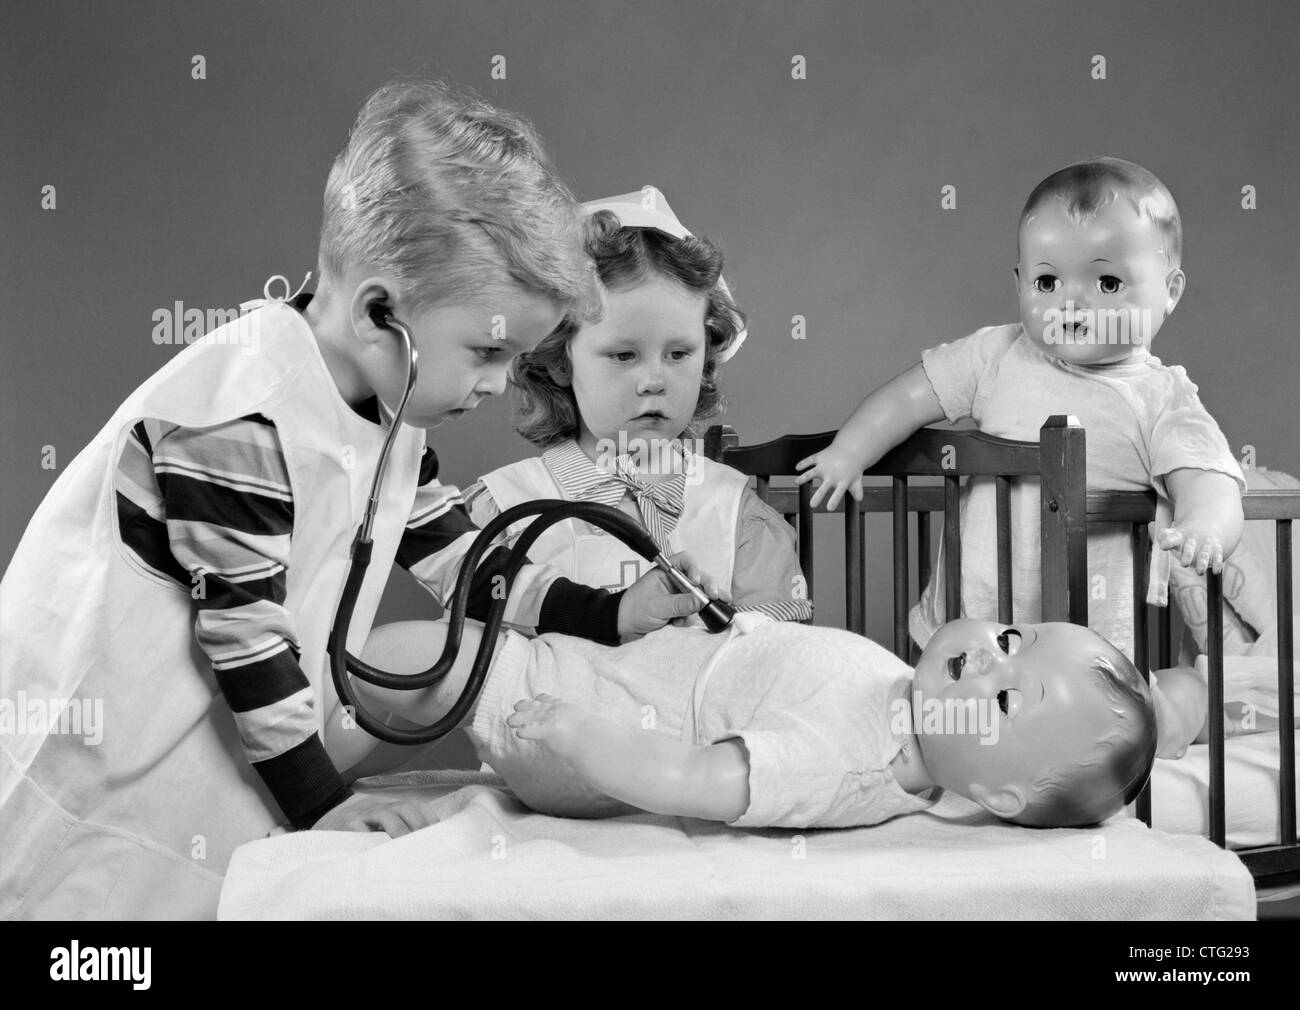 1950s BOY AND GIRL PLAYING DOCTOR AND NURSE WITH STETHOSCOPE AND DOLLS Stock Photo